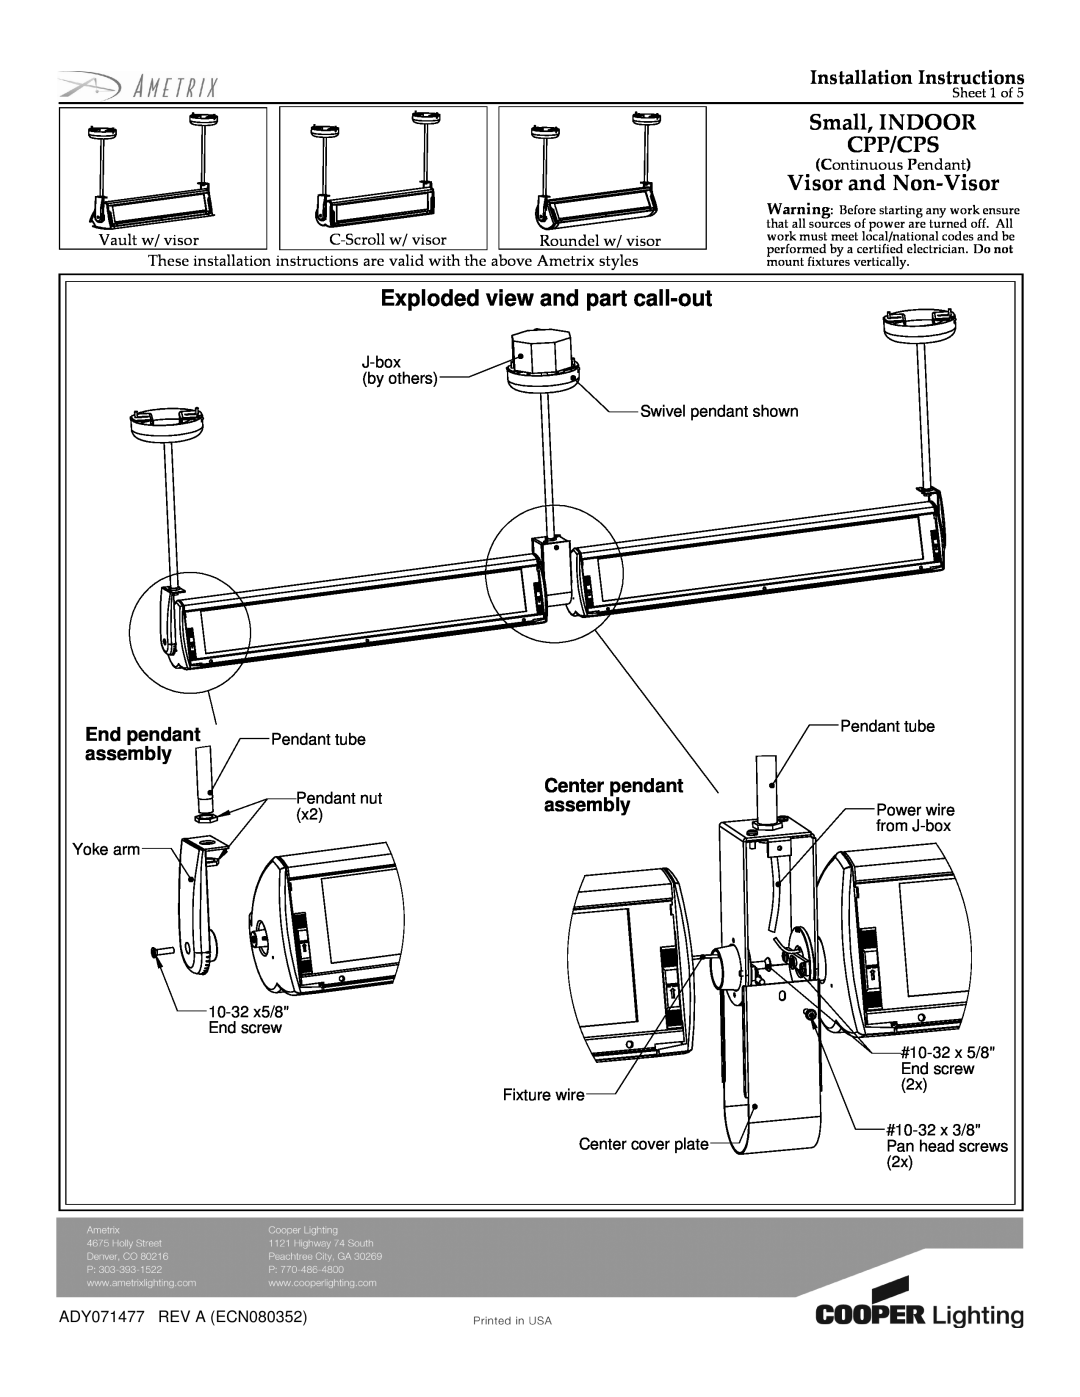 Cooper Lighting installation instructions Small, INDOOR CPP/CPS, Visor and Non-Visor, Exploded view and part call-out 